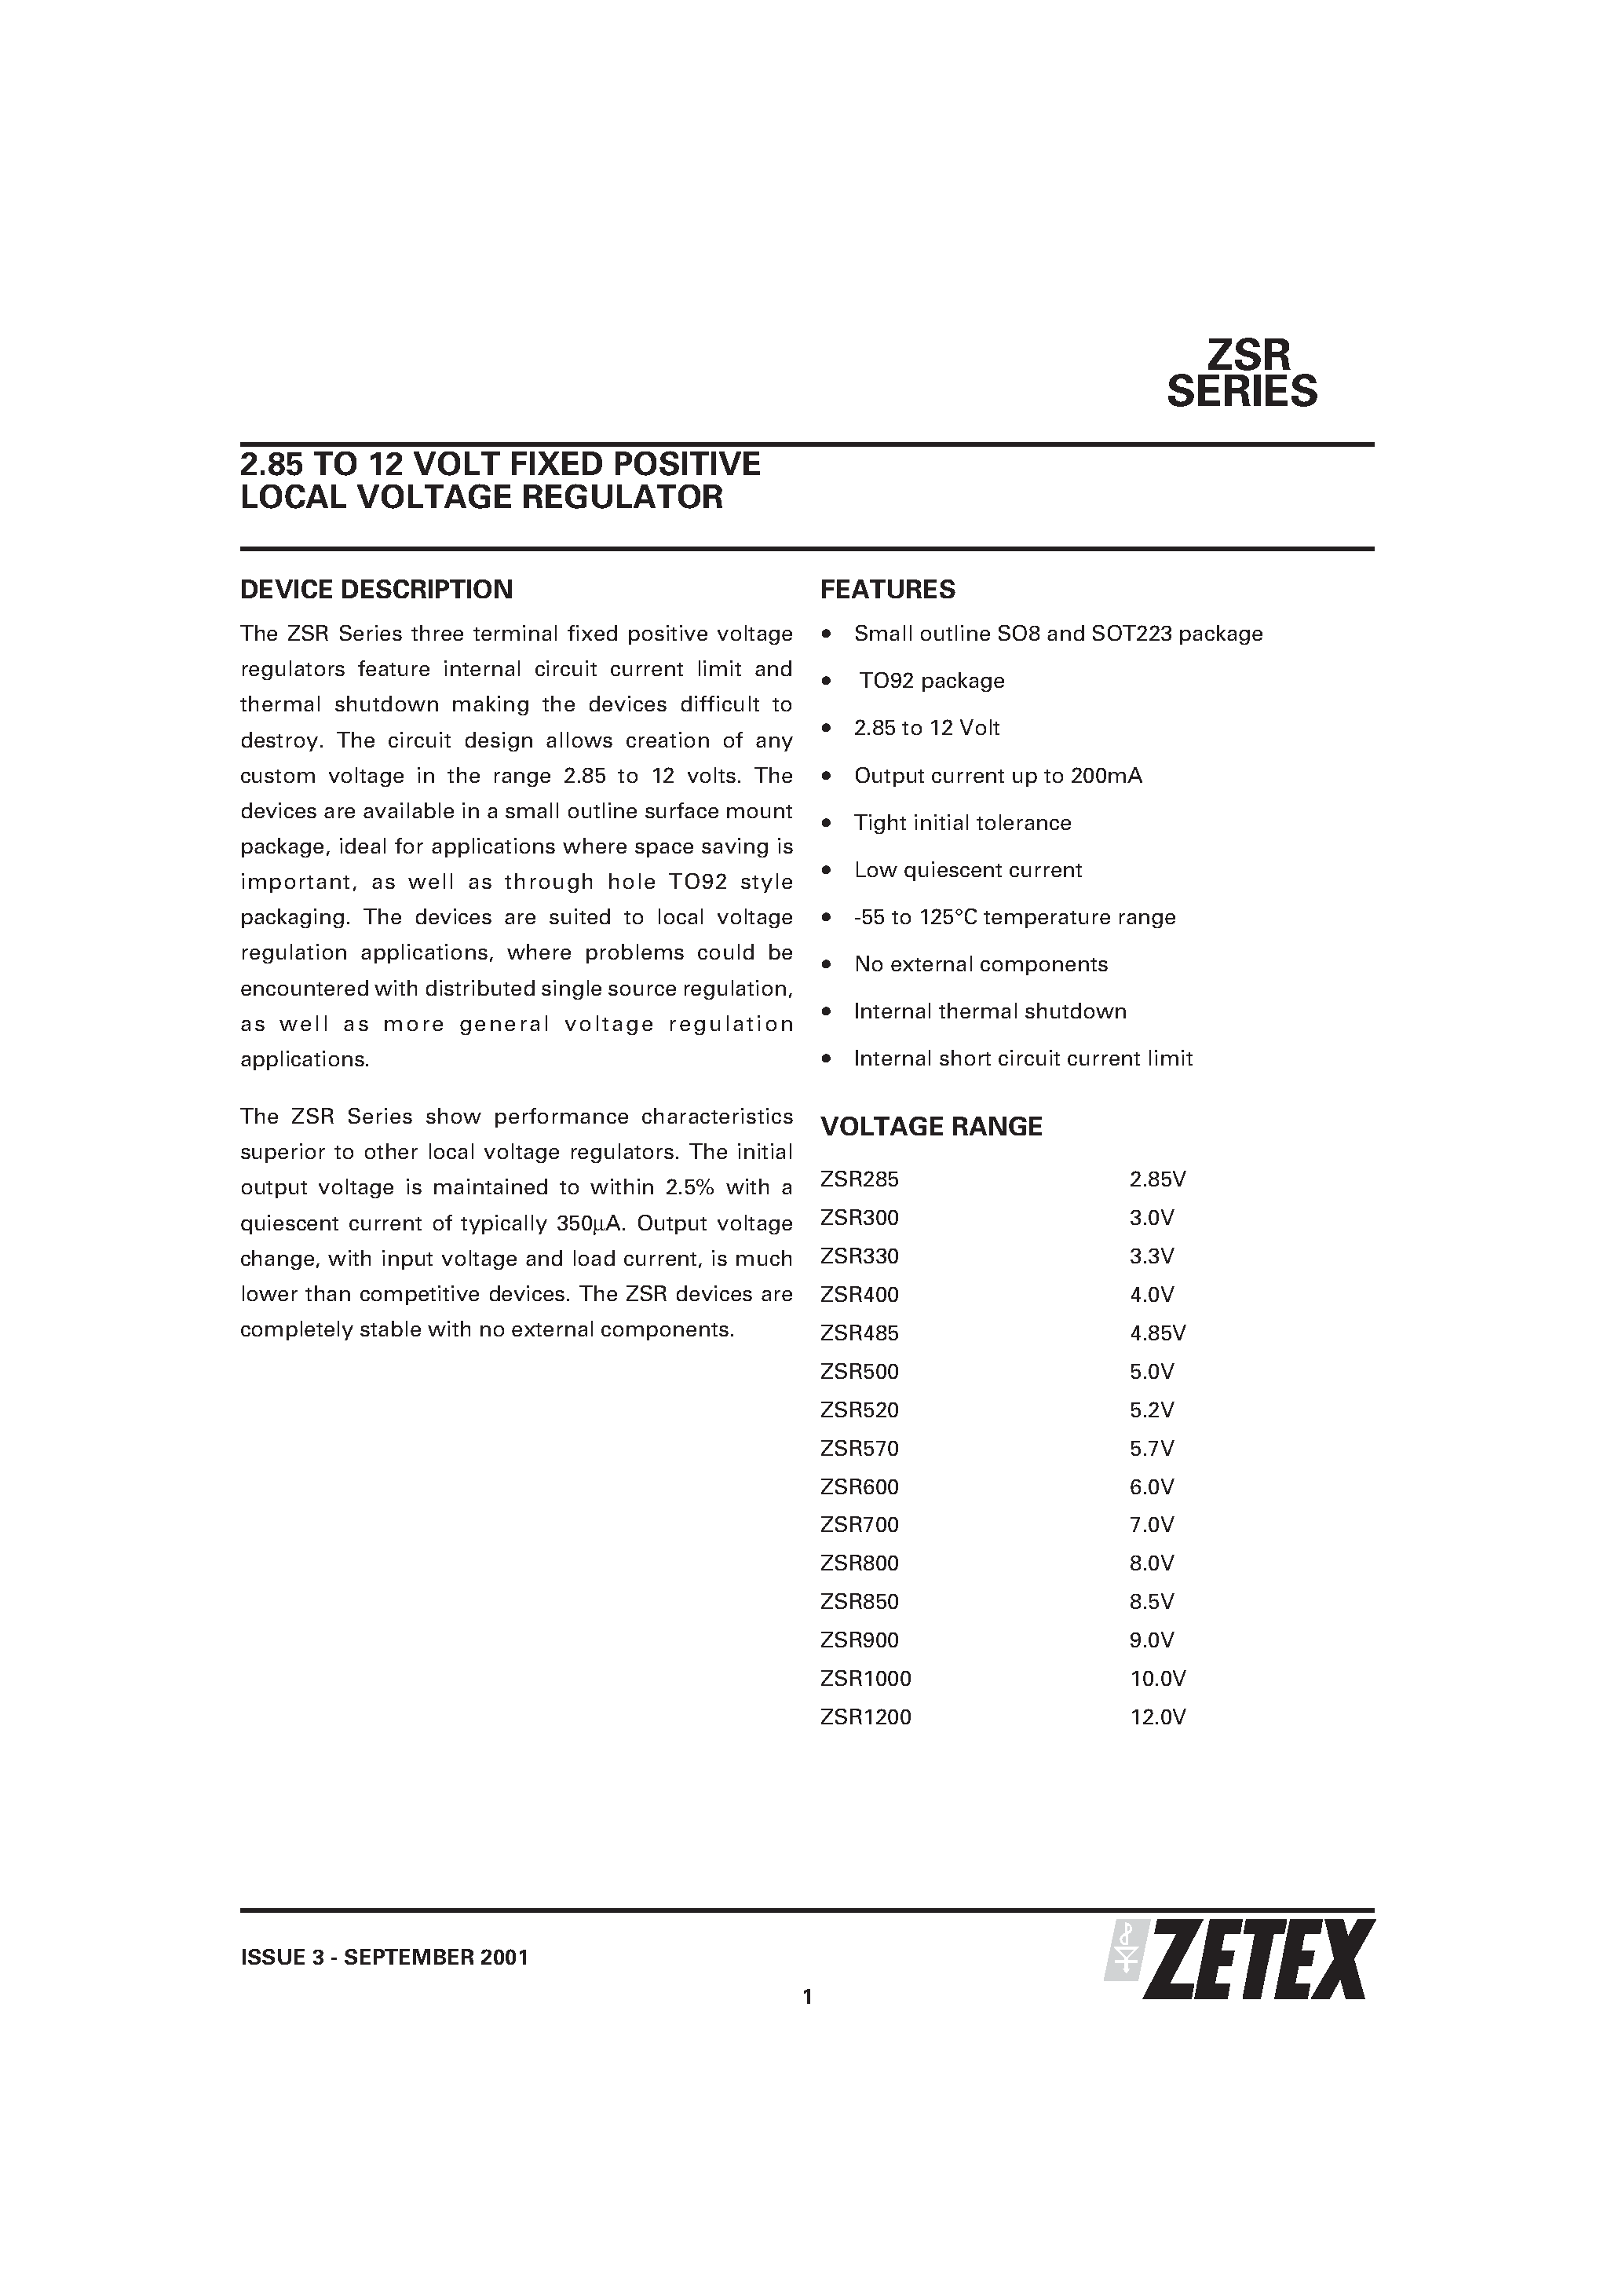 Datasheet ZSR700N8 - 2.85 TO 12 VOLT FIXED POSITIVE LOCAL VOLTAGE REGULATOR page 1